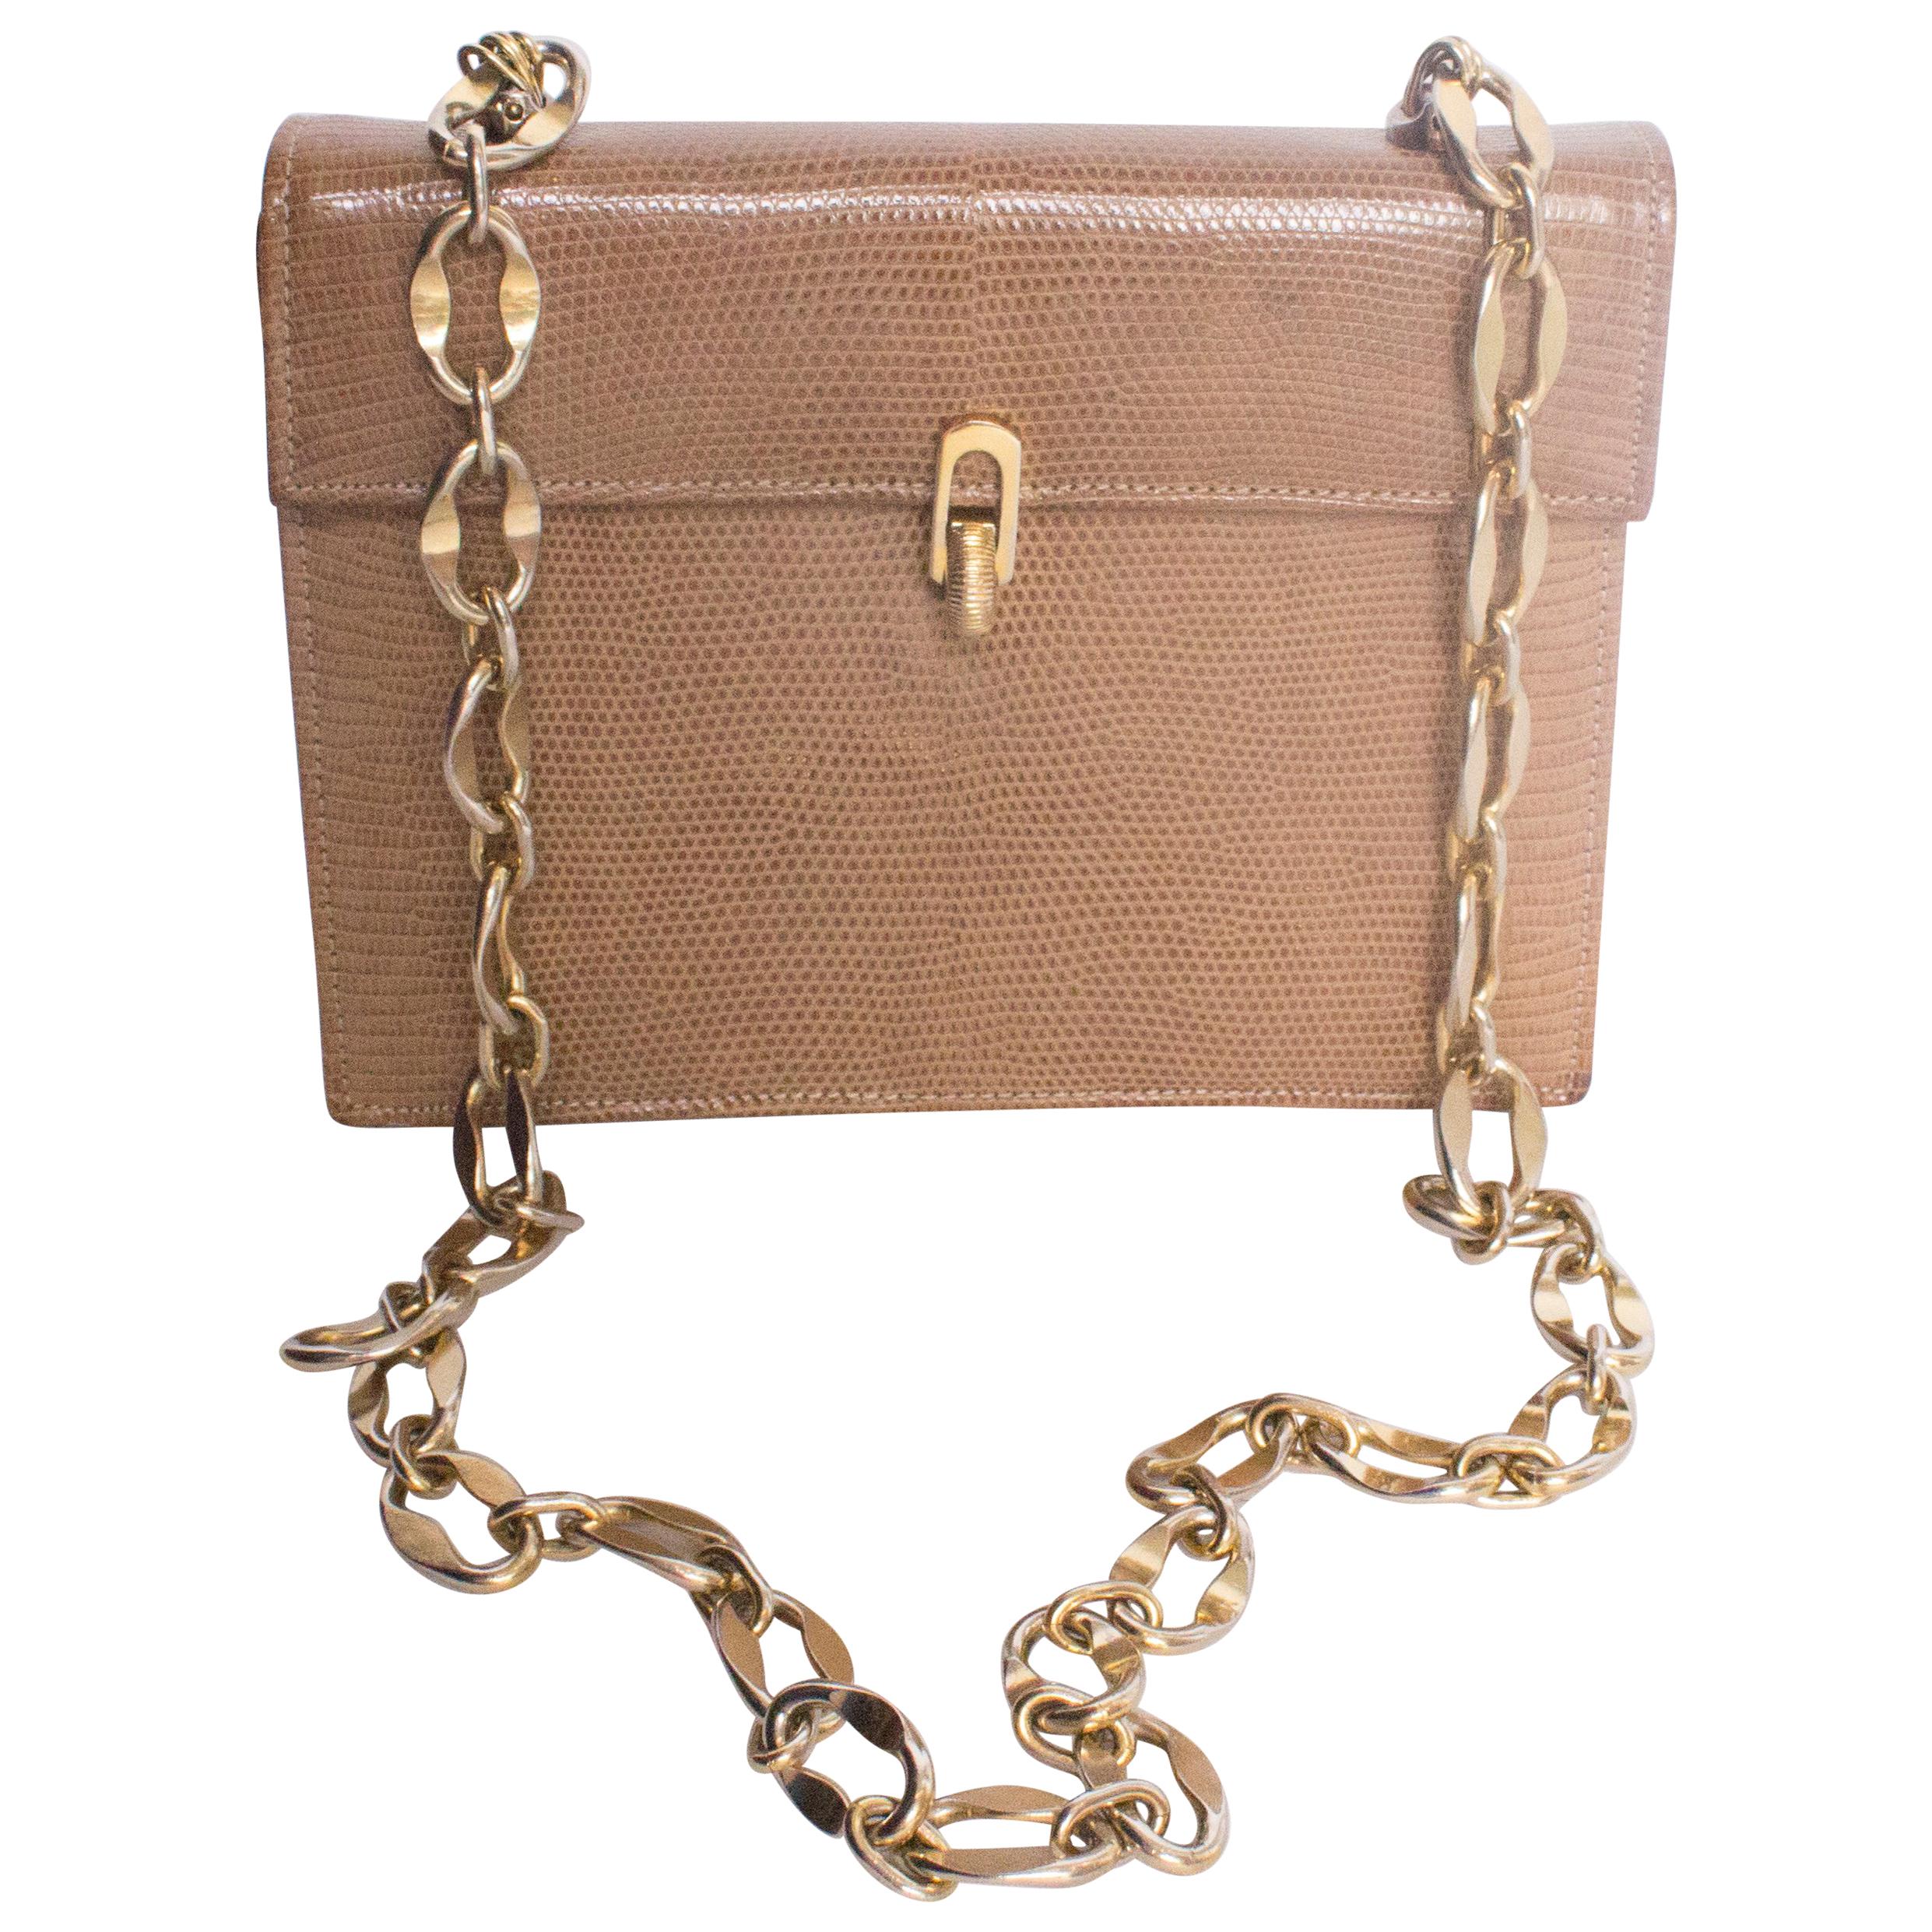 A Vintage 1970s Lizzard Handbag with a Gold Chain